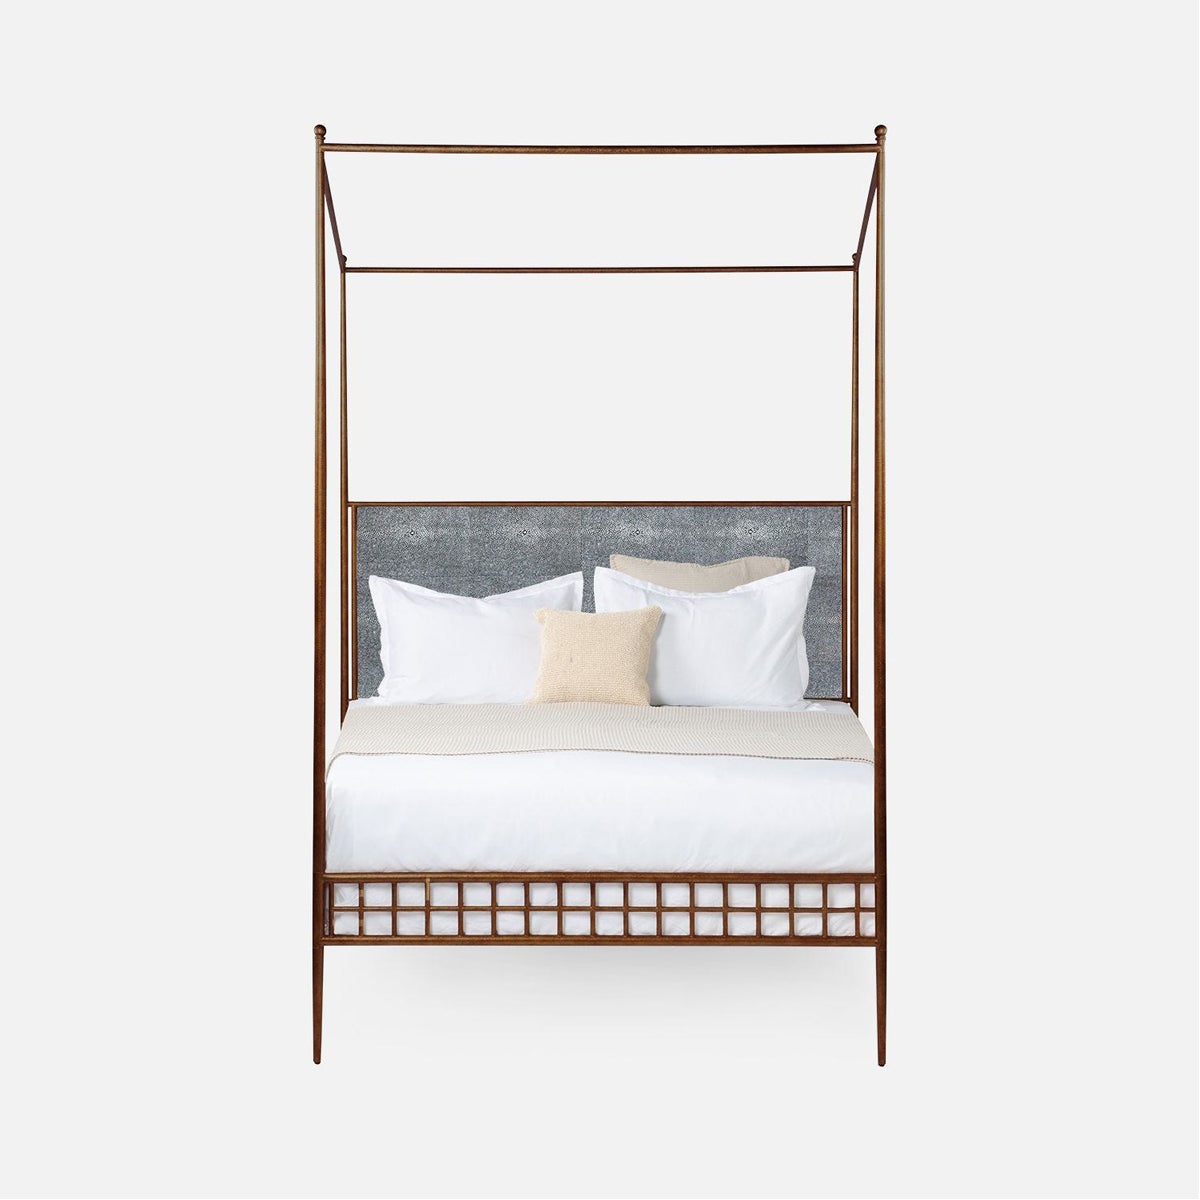 Made Goods Hamilton Textured Iron Canopy Bed in Colorado Leather